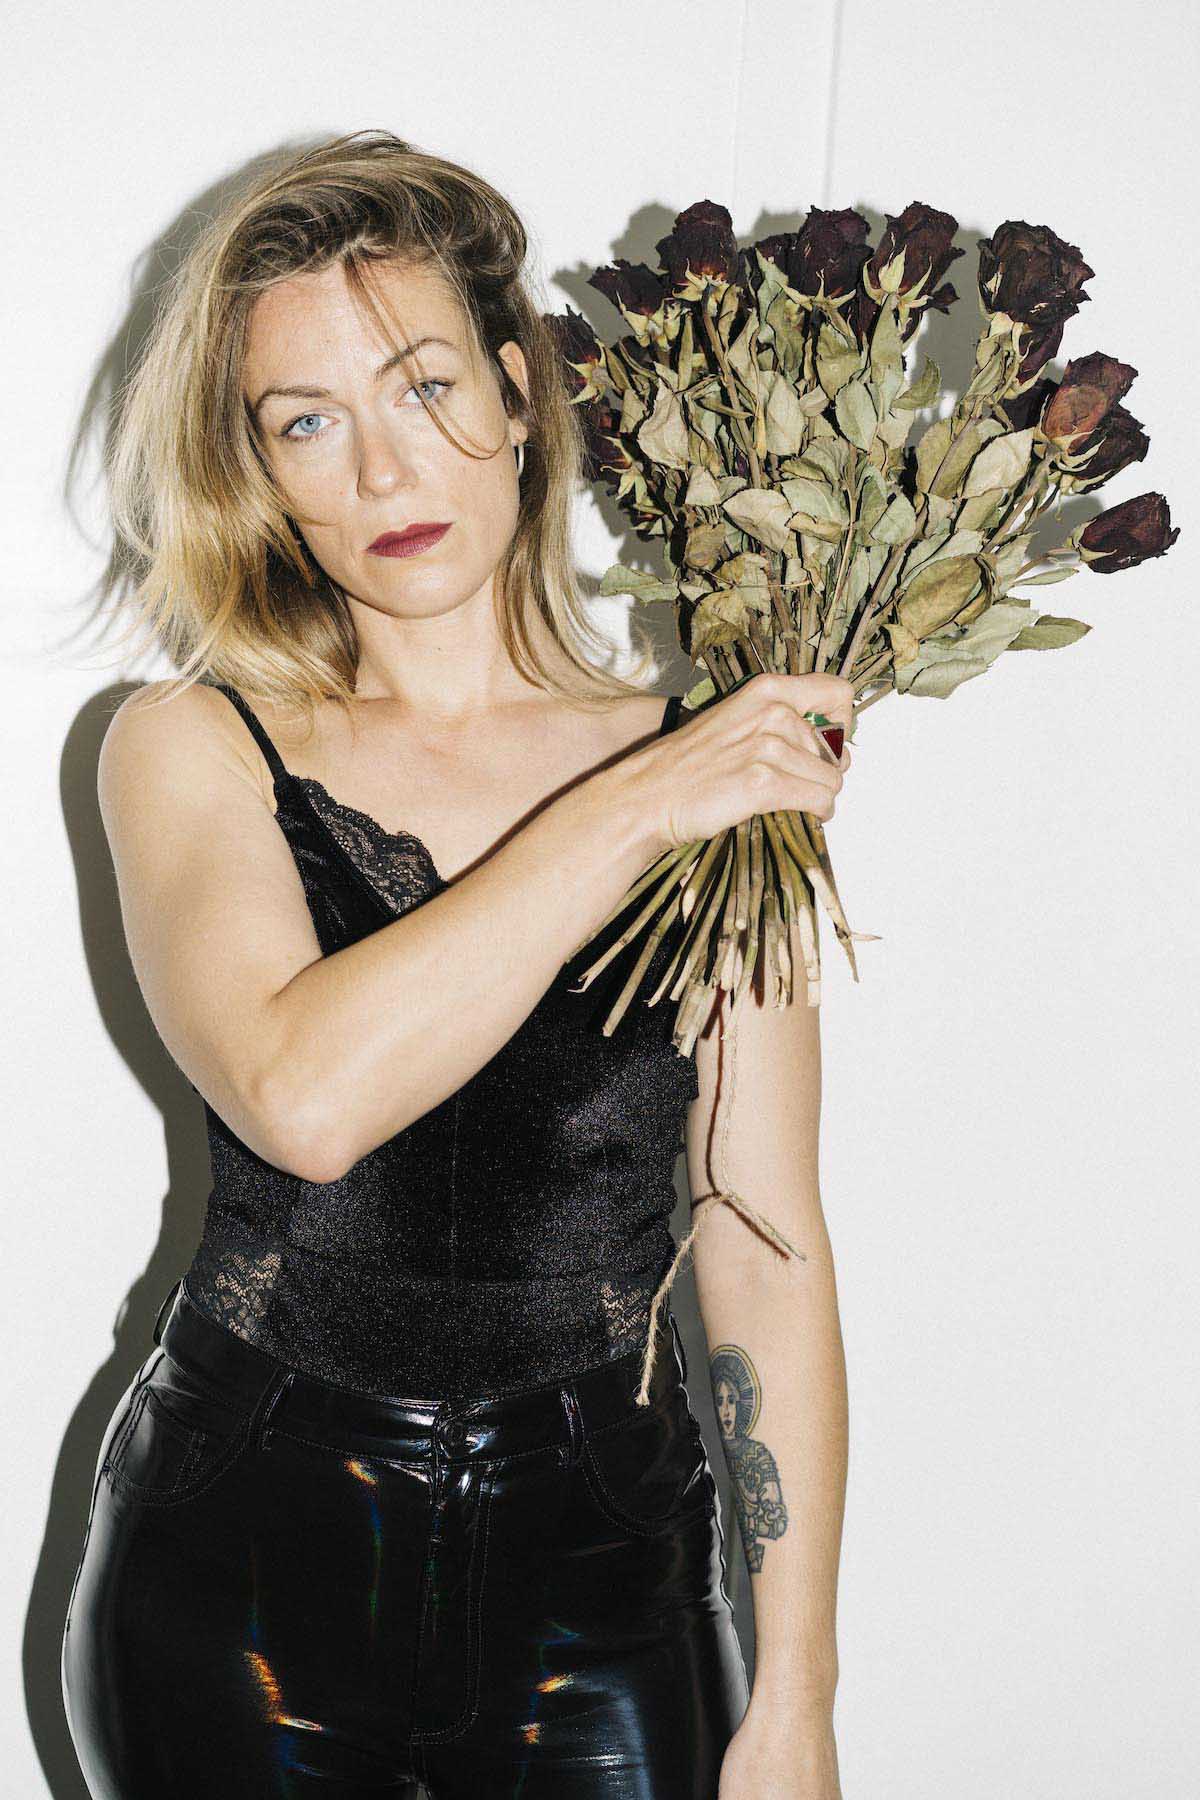 Blonde, white woman with shoulder-length hair, a black tank top with ruffles and black vinyl trousers looks into the camera. Charlotte Brandi has piercing blue eyes, her lips are red. A tattoo can be seen on her forearm. With her right hand, she holds a withered bouquet of roses next to her face towards her left shoulder. The background is white.